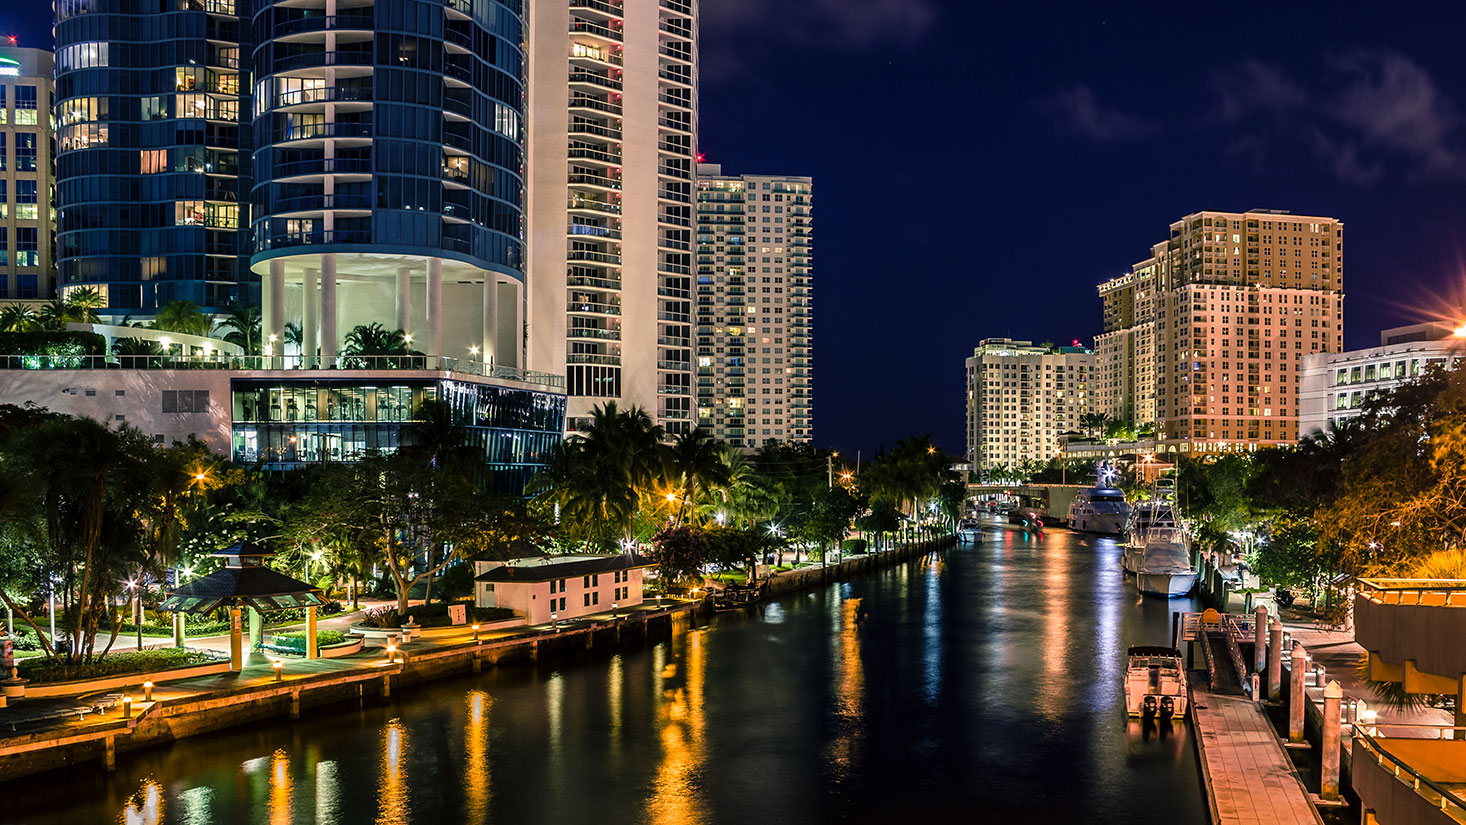 Riverwalk Arts and Entertainment District of Ft. Lauderdale at night.